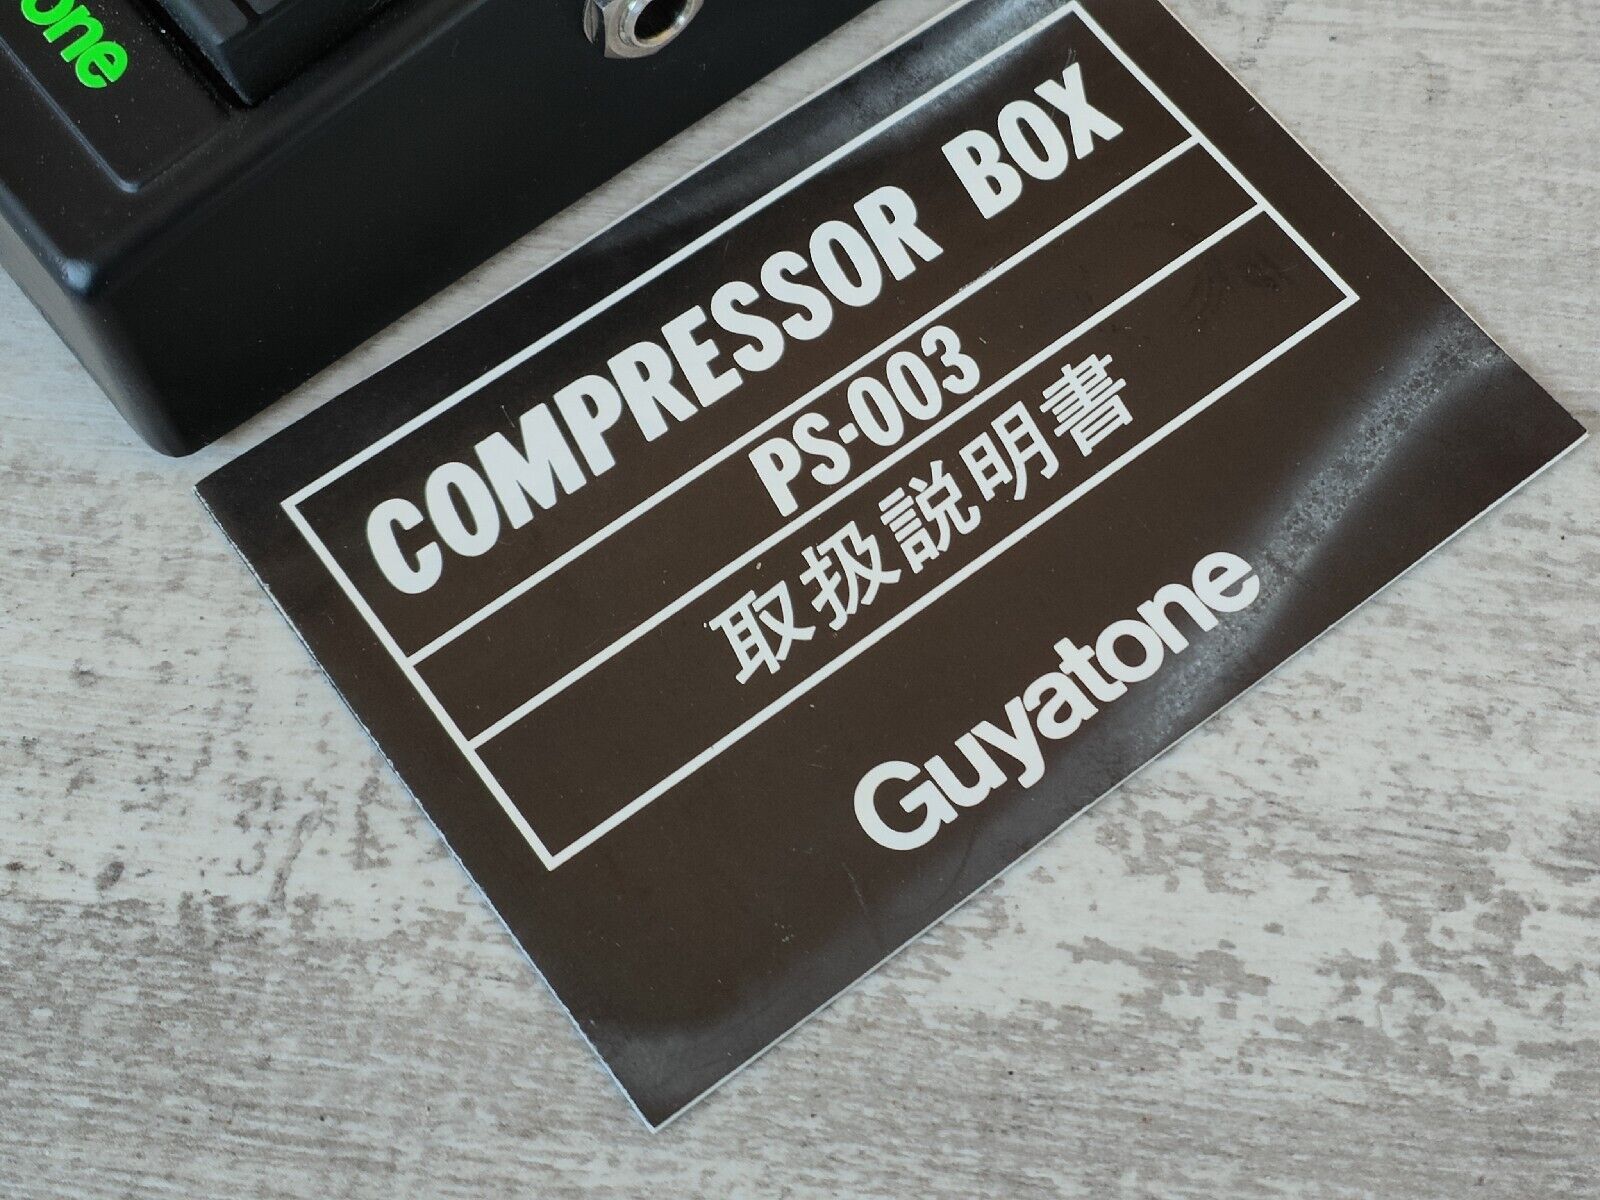 1980 Guyatone Japan PS-003 Compressor Vintage Effects Pedal w/Box